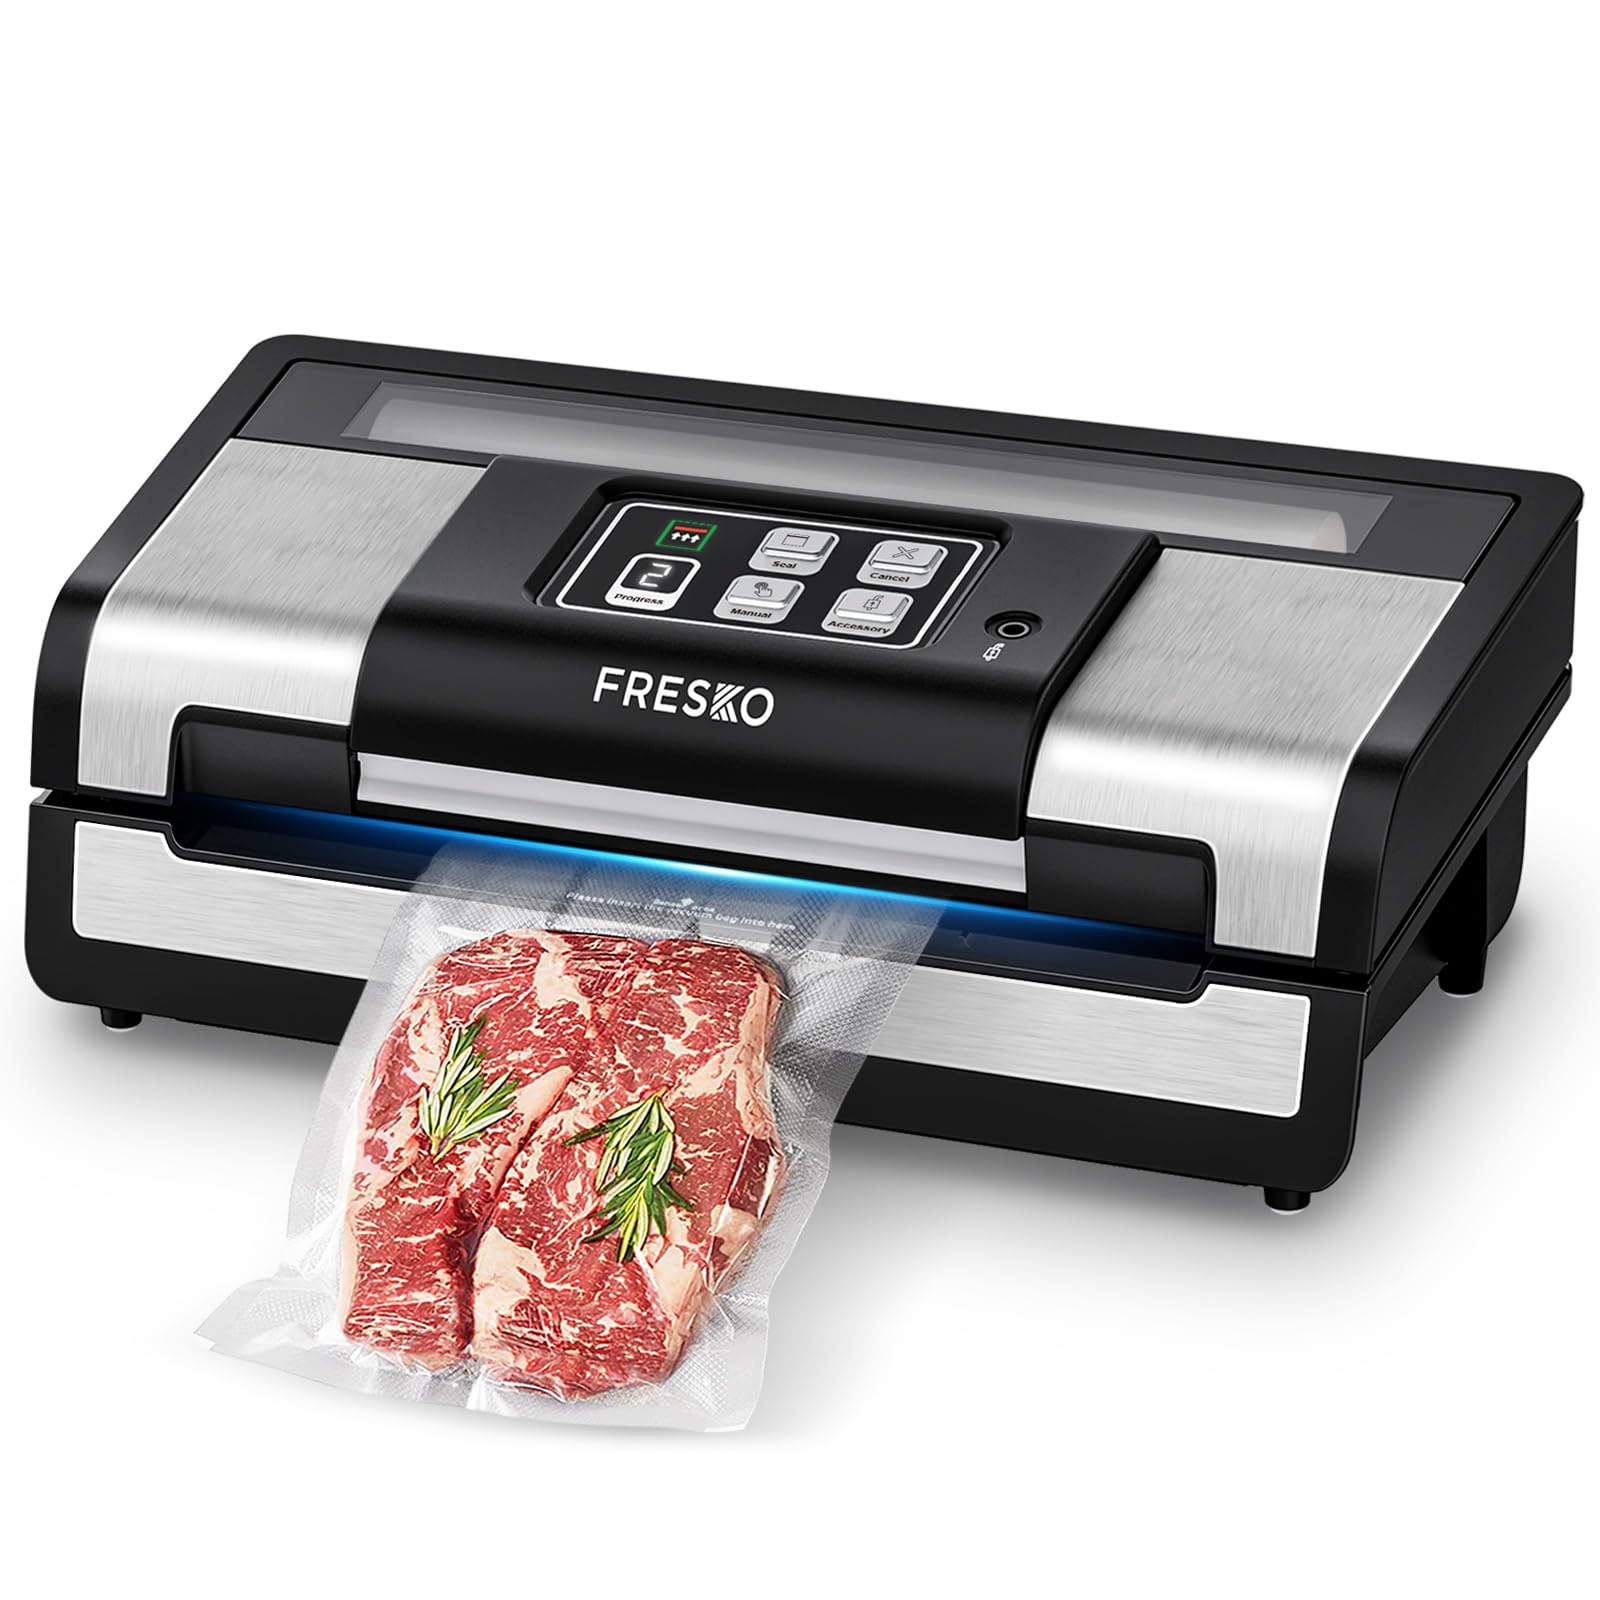 FRESKO Smart Vacuum Sealer Pro, Full Automatic Food Sealer Machine with Auto Dry/Moist Detection, Roll Bag and Built-in Cutter, Powerful Seal a Meal Sealer Machine for Food Storage Saver